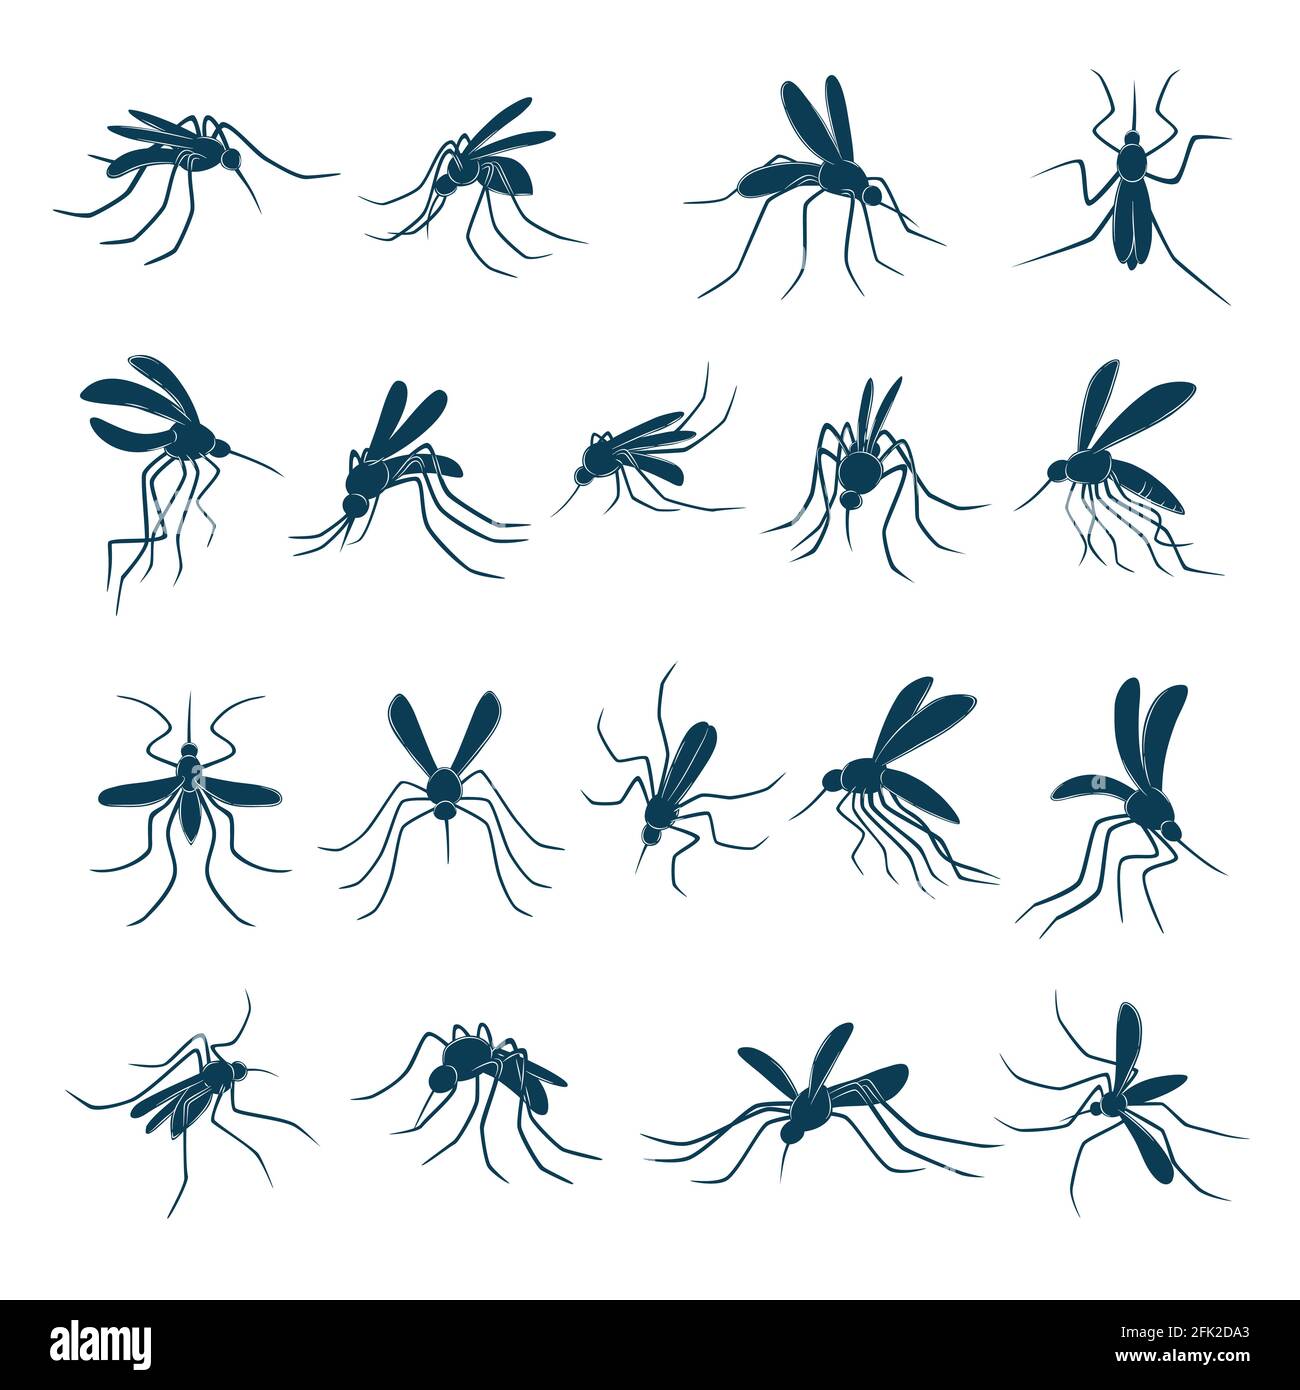 Flying mosquito. Little bloodsucker insects carriers of viruses silhouettes vector drawn set Stock Vector